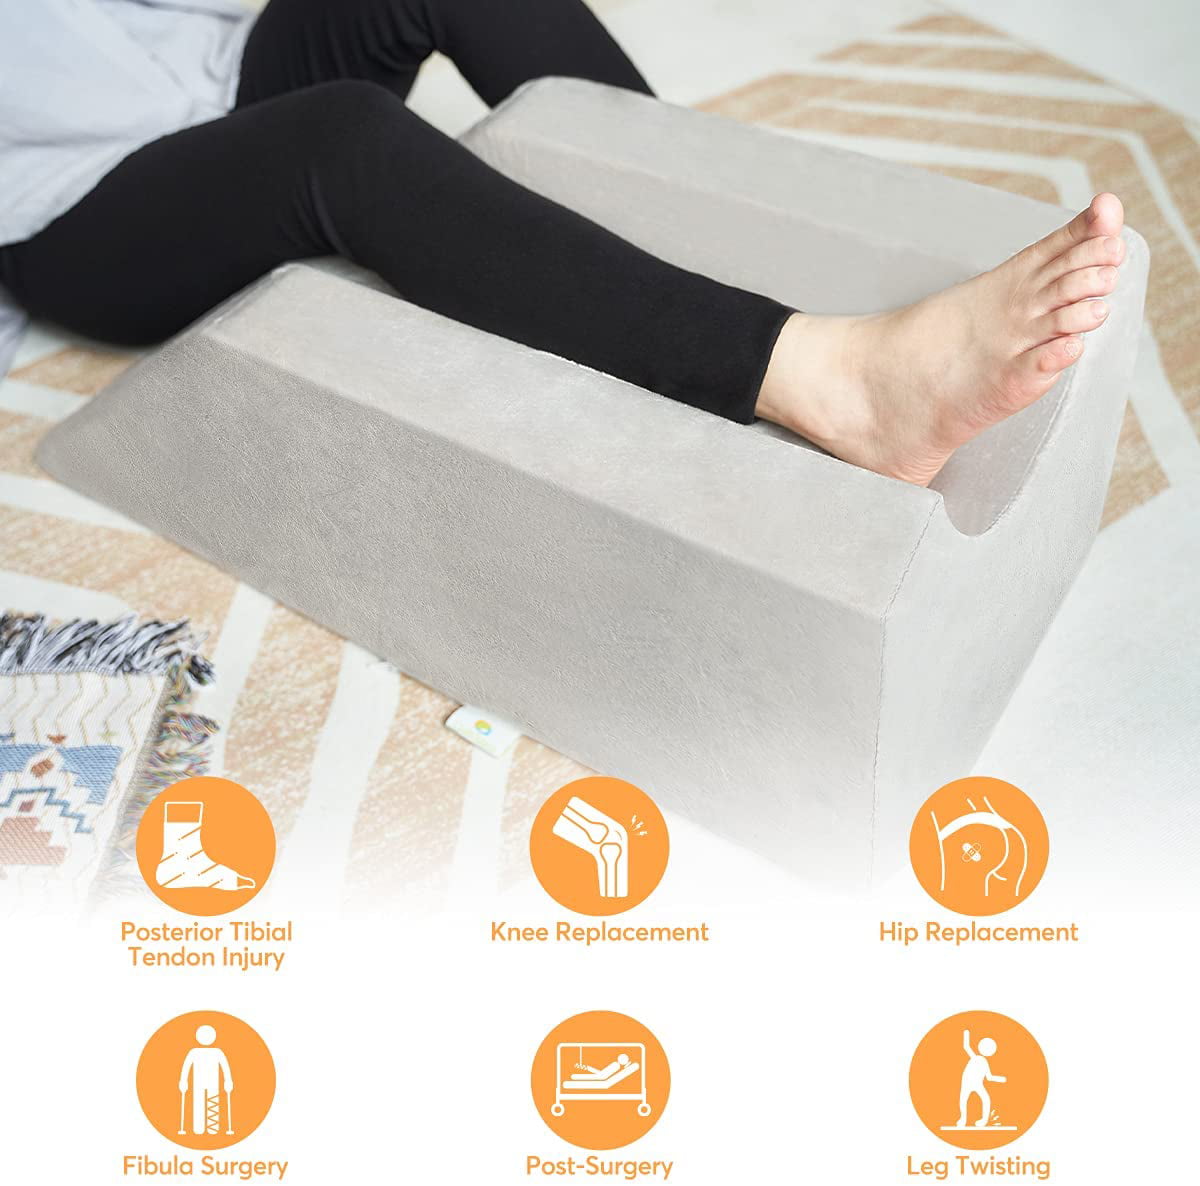 OasisSpace Leg Support Pillow for Surgery, Swelling, Injury or Rest -  Memory Foam Pillows for Knee, Ankle and Foot - Improve Circulation?unisex?  